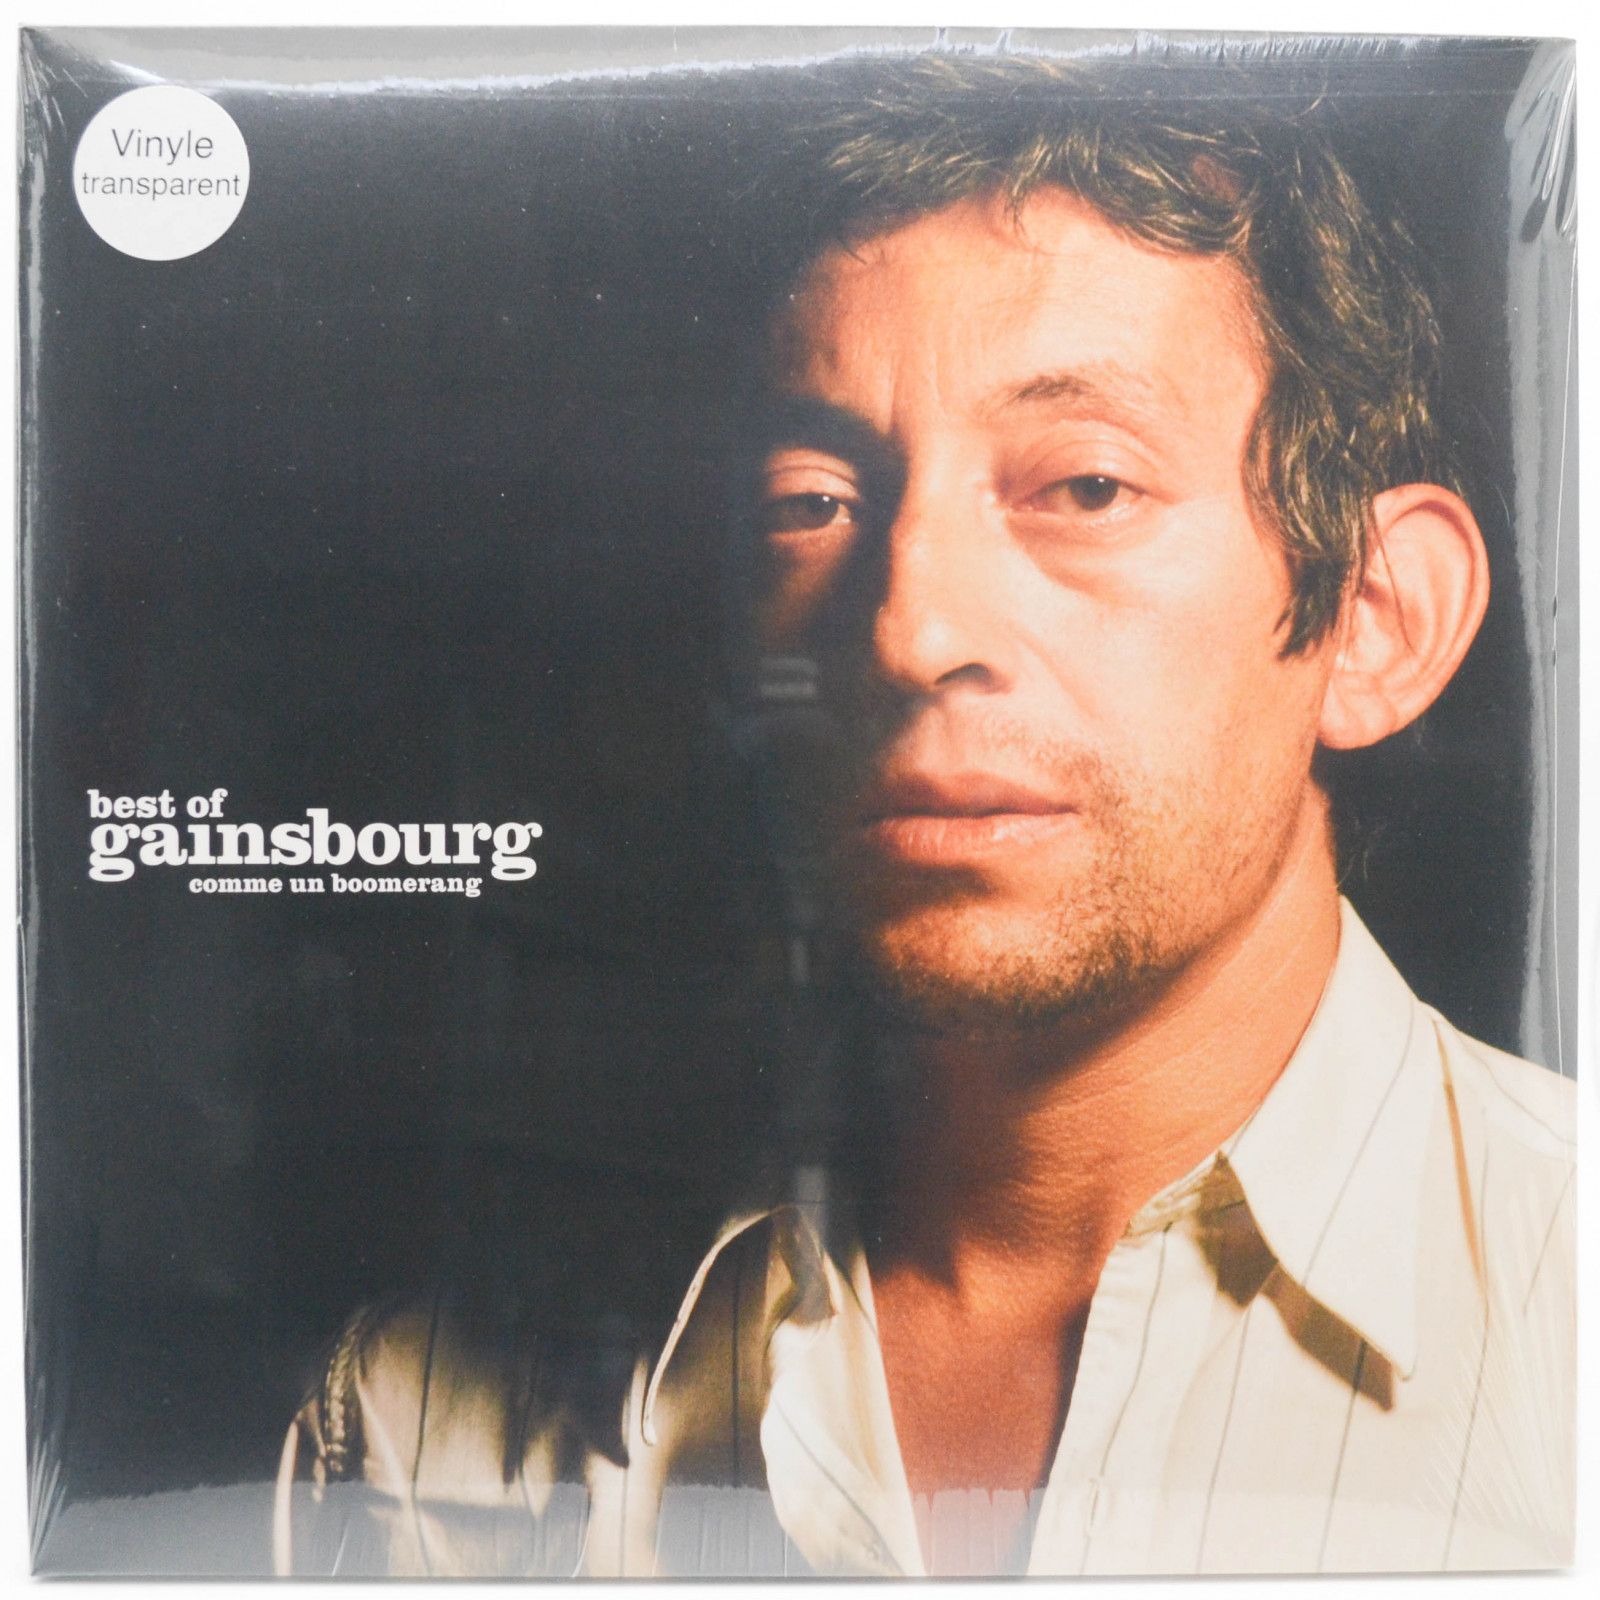 Gainsbourg — Best Of - Gainsbourg - Comme Un Boomerang (2LP, France), 1988